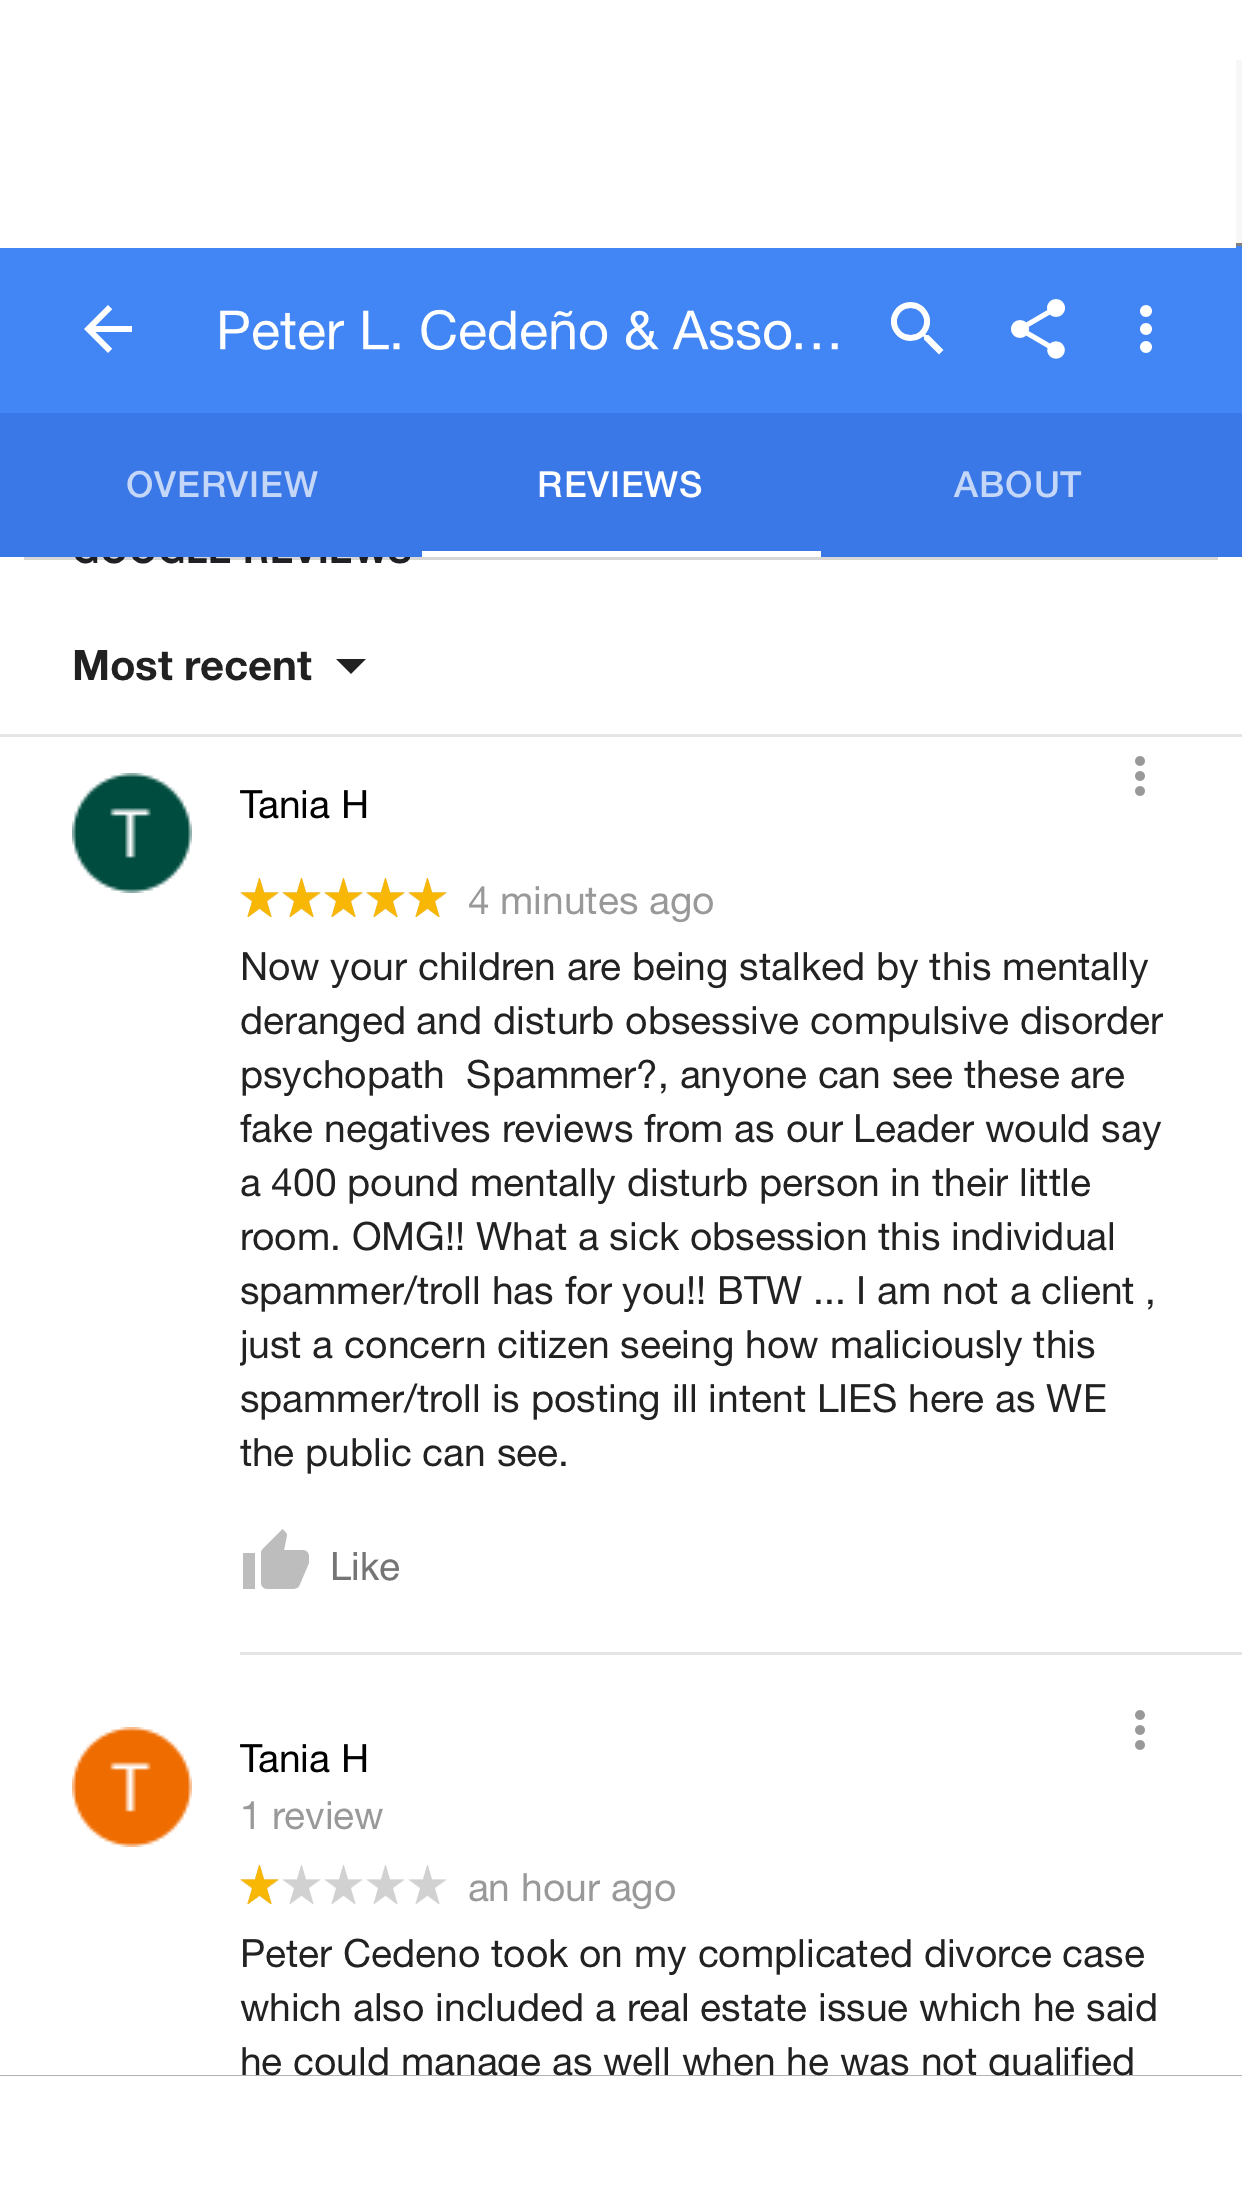 Google Review 2